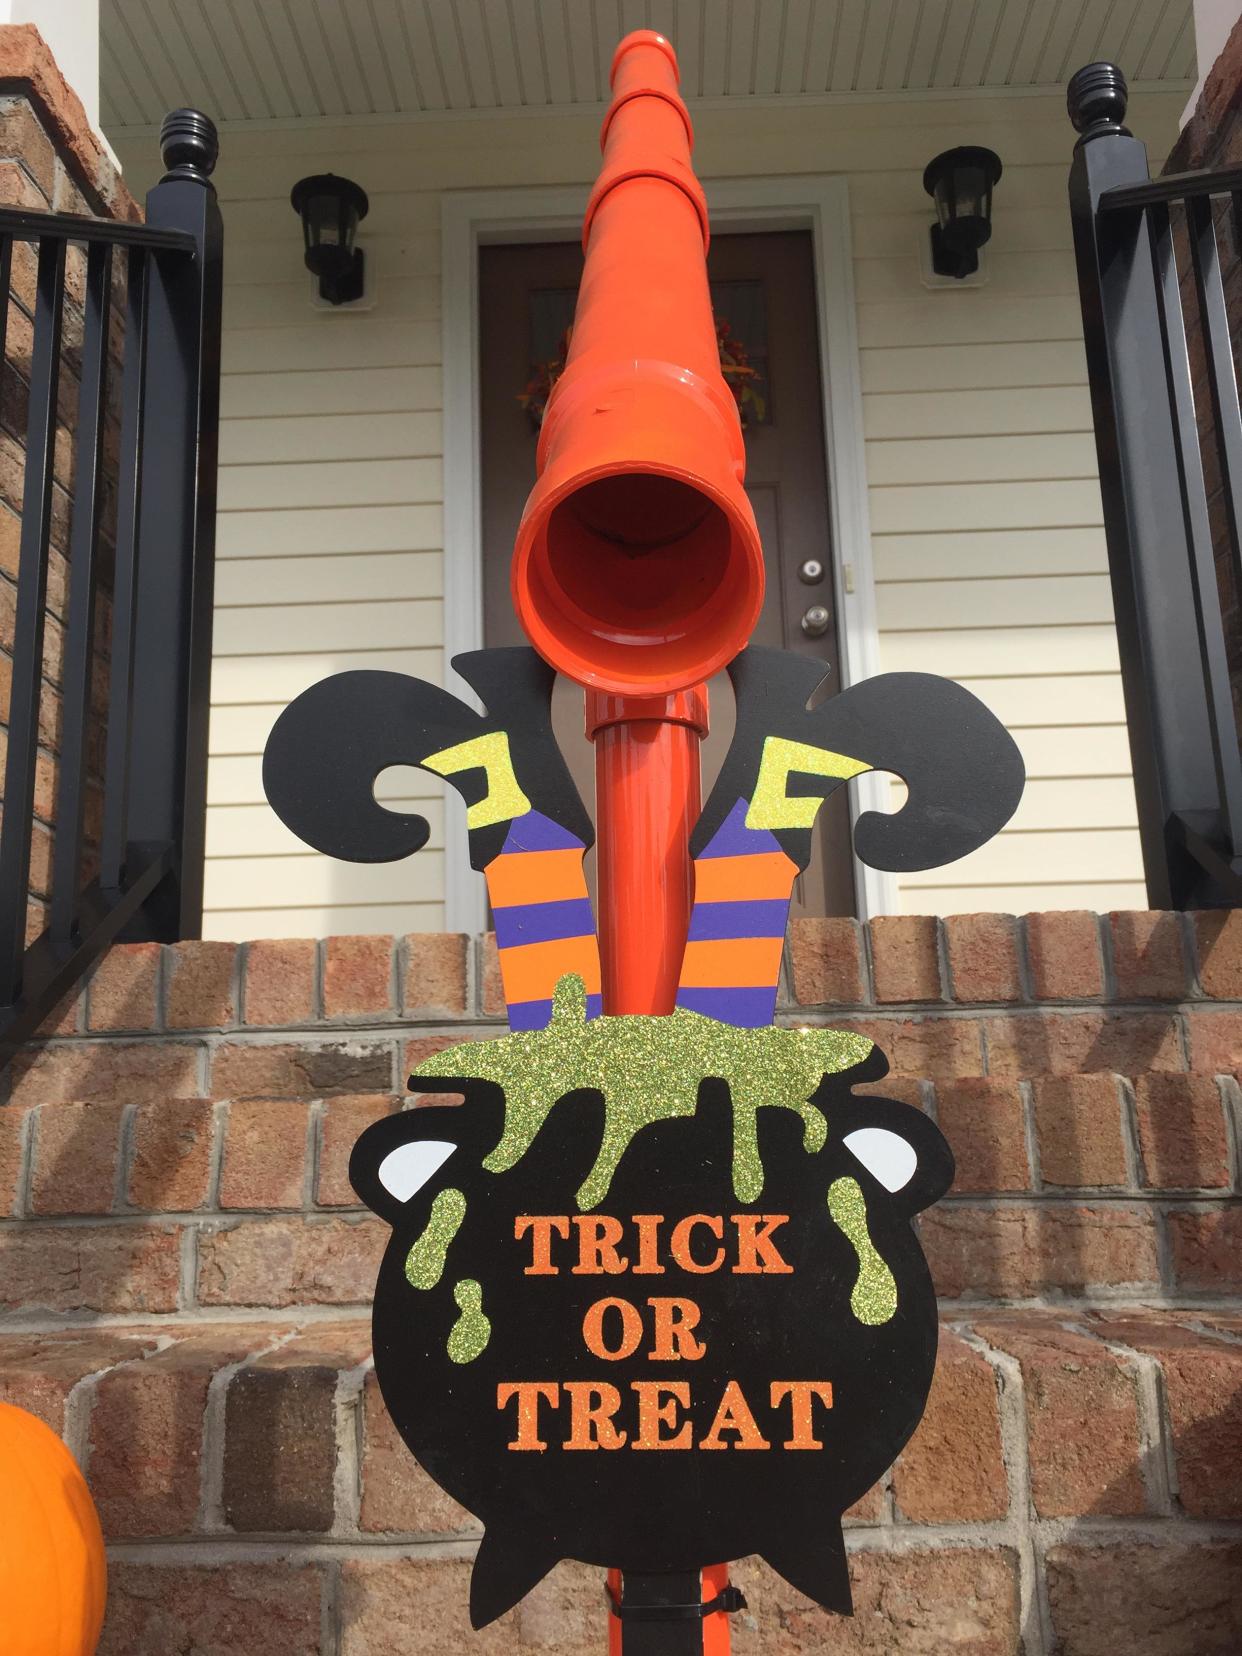 Chris Minor created this candy slide to help provide a safe trick-or-treating experience. (Photo: Chris Minor)